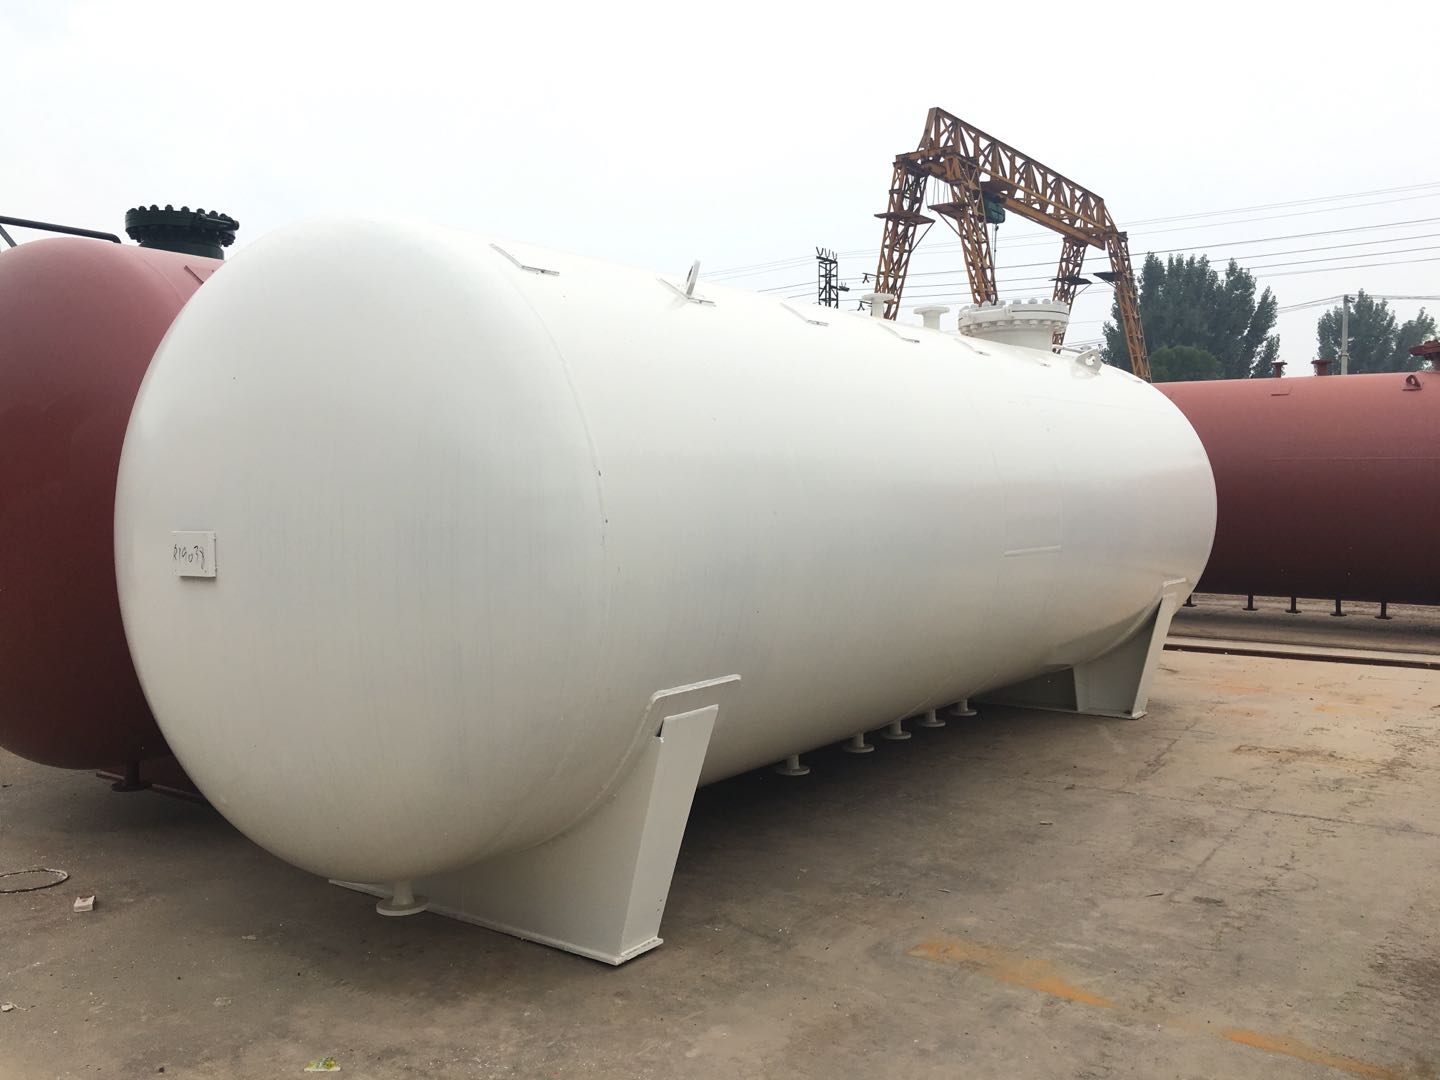 Strict quality inspection of liquefied gas storage tanks (liquefied petroleum gas storage tanks)